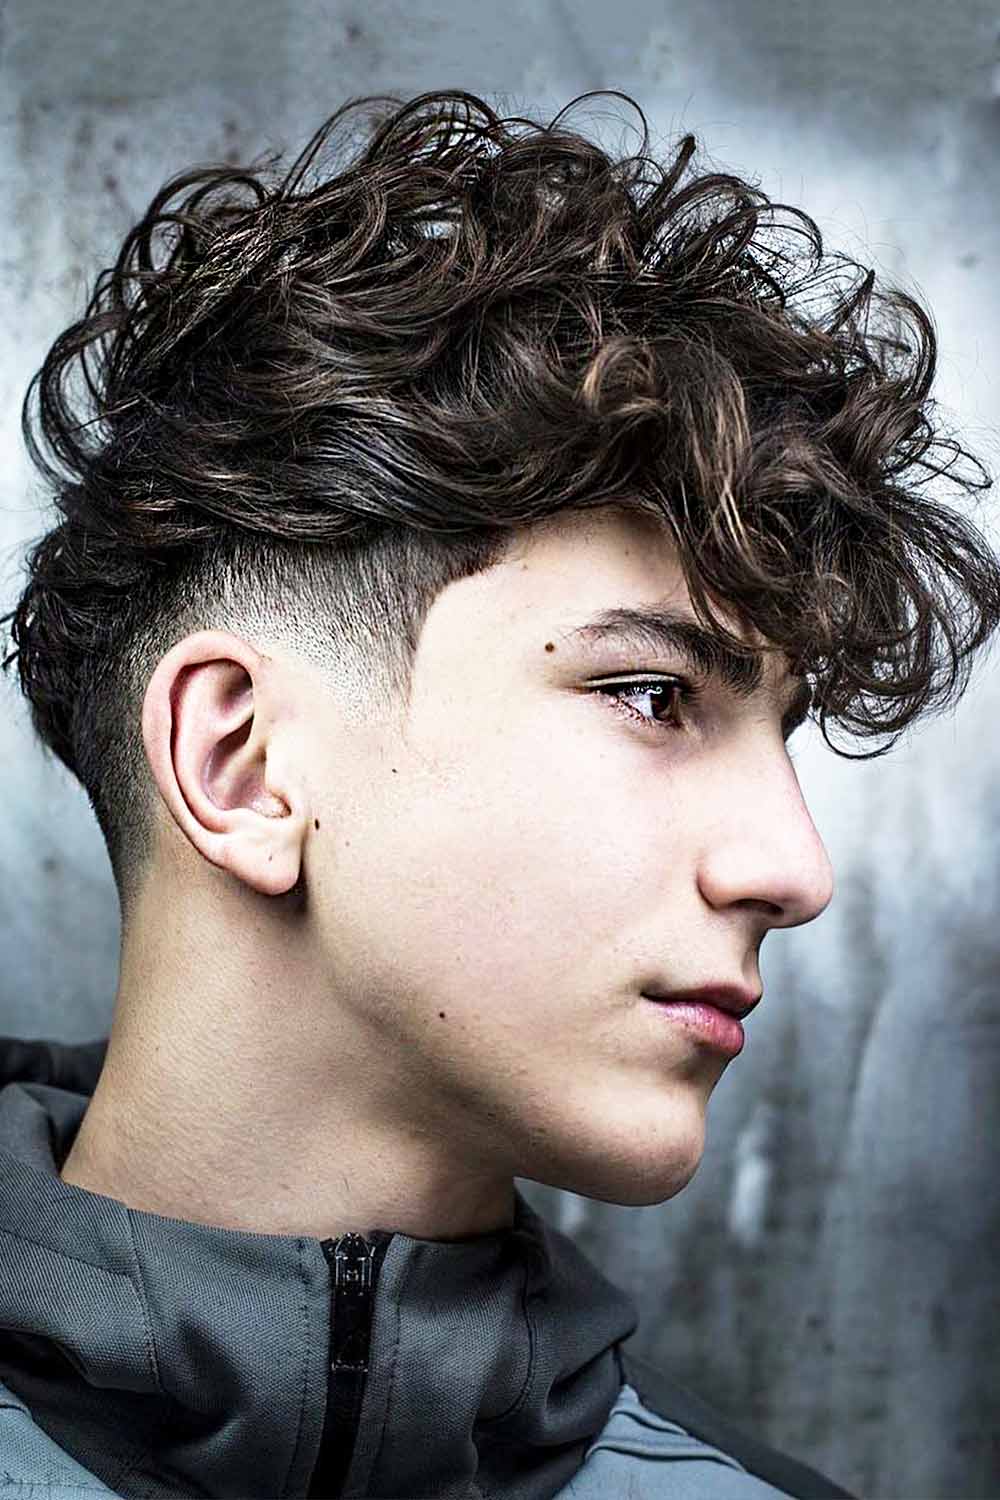 Low Fade Haircut Ideas For Men In 2023 - Mens Haircuts